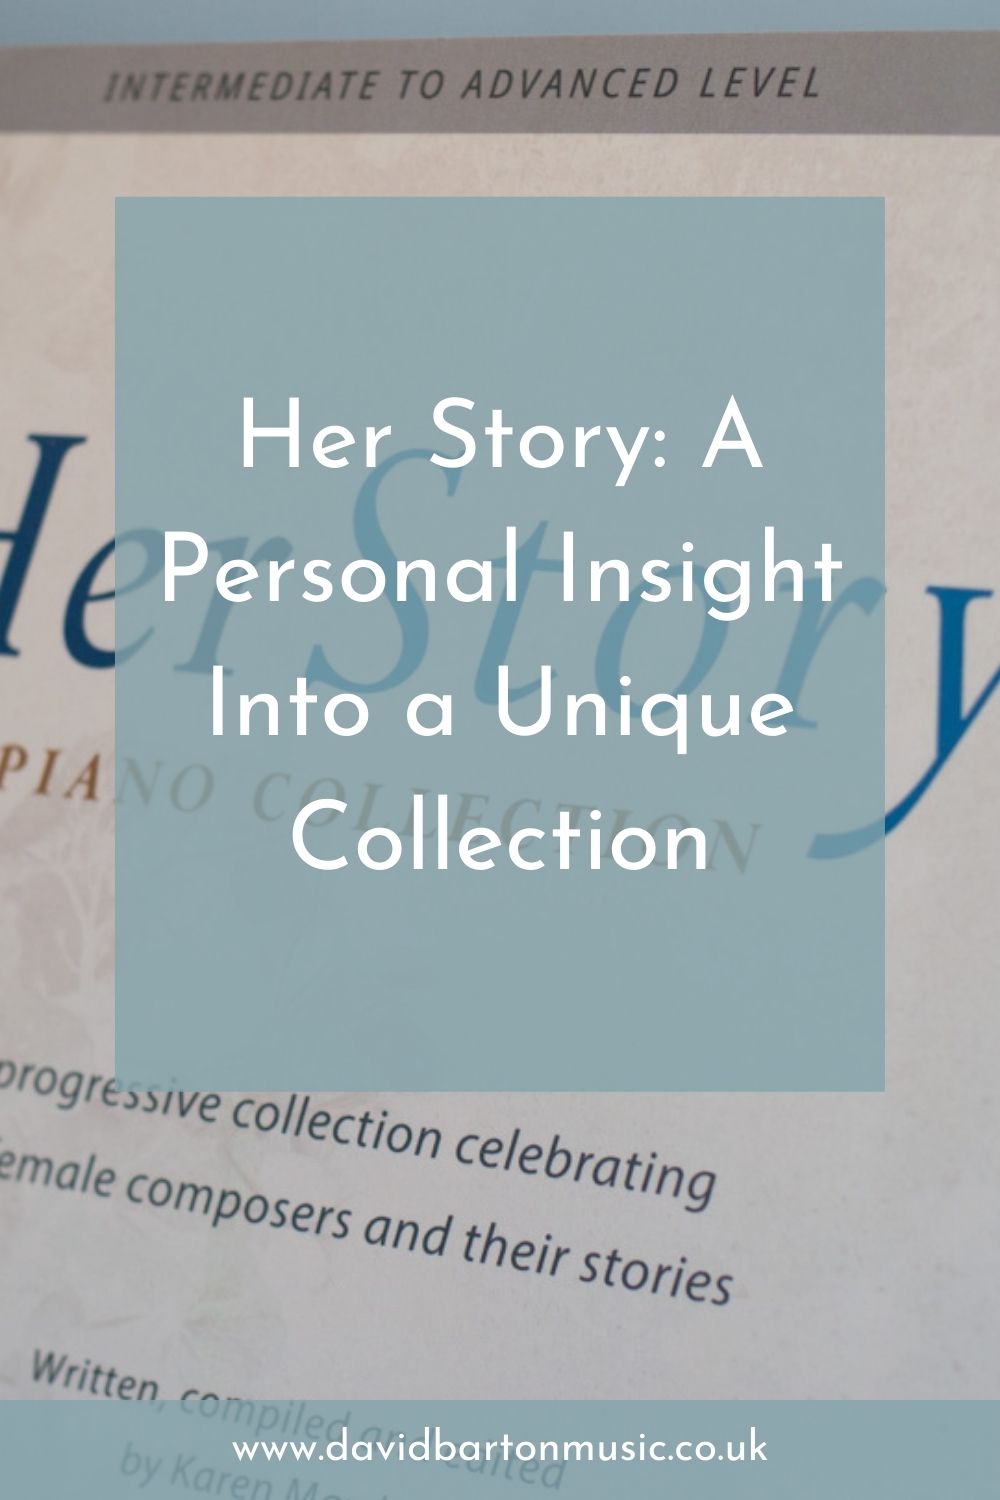 Her Story: A Personal Insight Into a Unique Collection - Pinterest Graphic